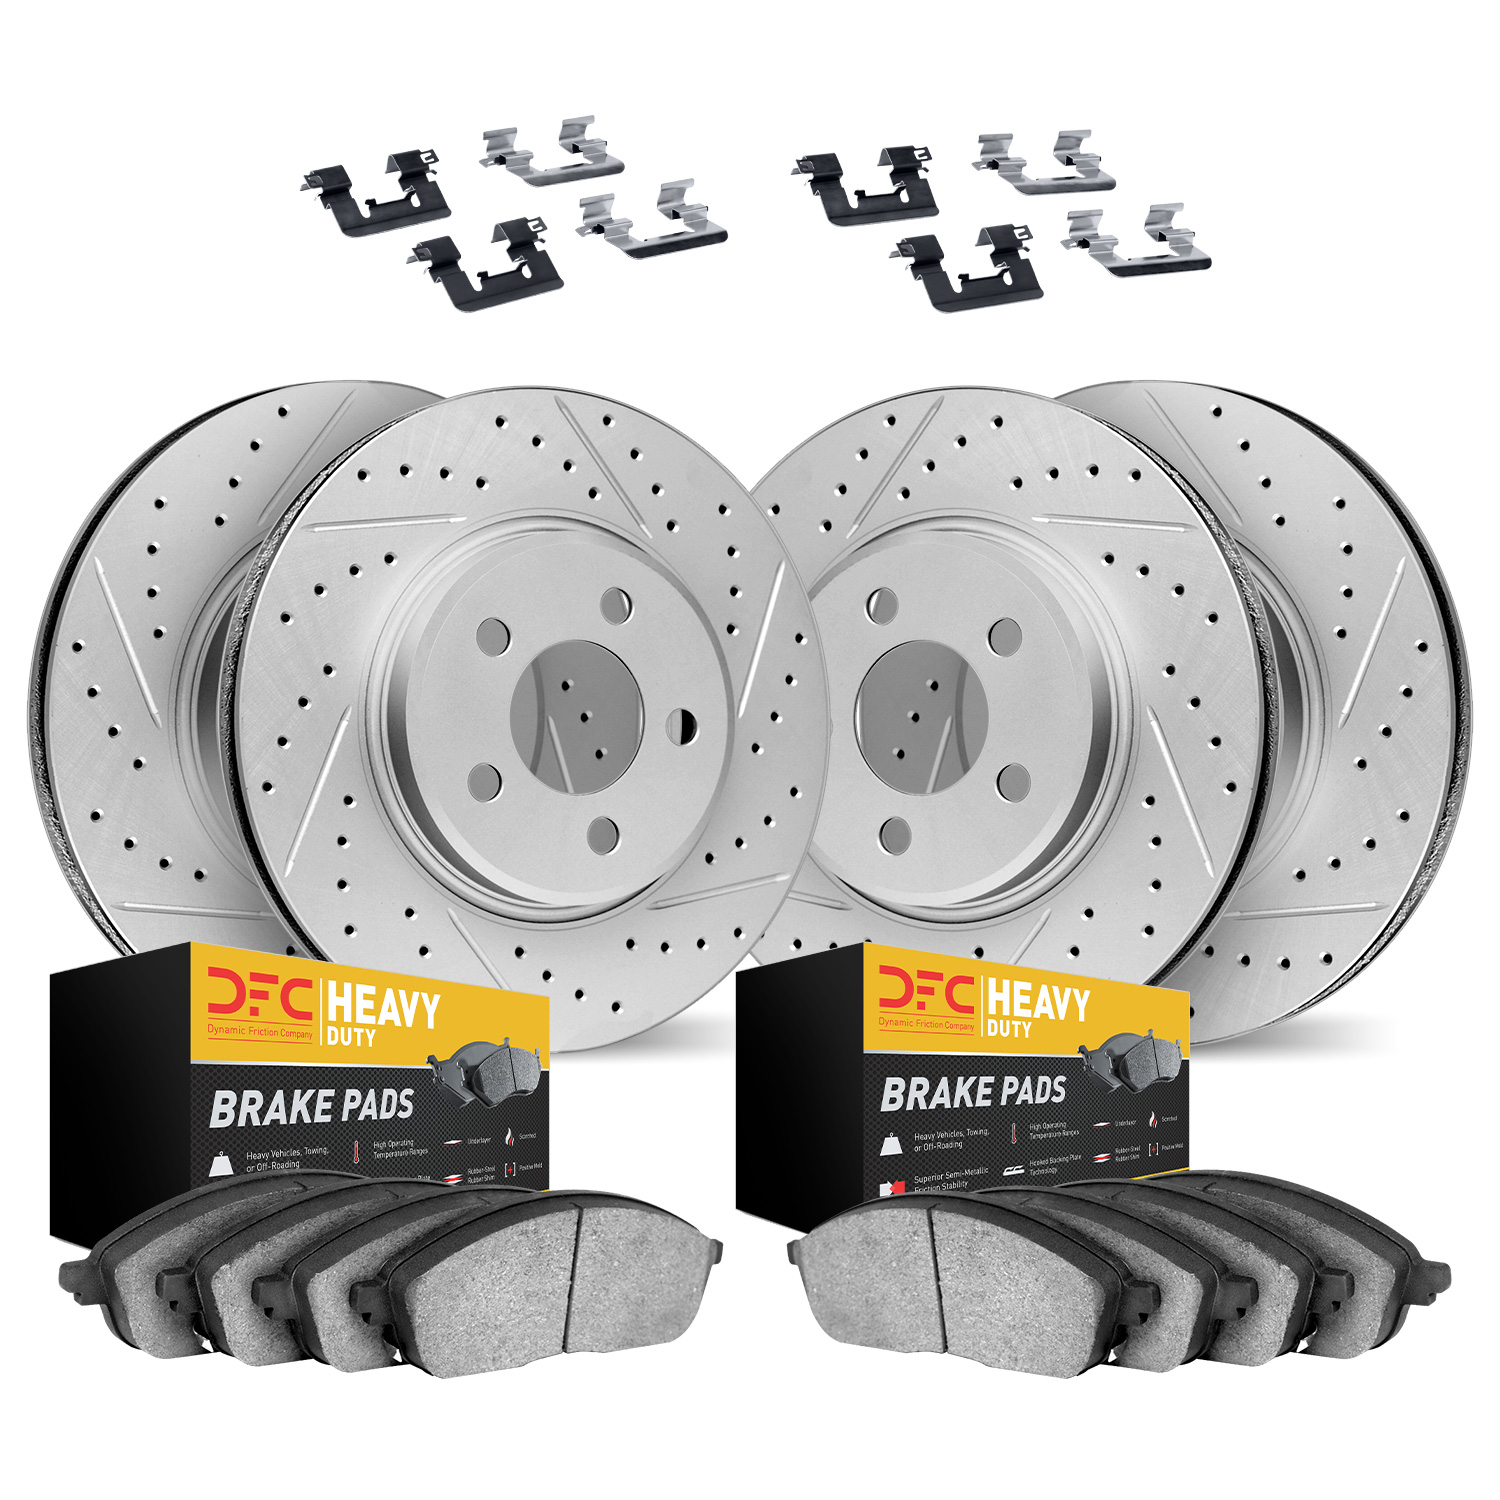 2214-42004 Geoperformance Drilled/Slotted Rotors w/Heavy-Duty Pads Kit & Hardware, Fits Select Mopar, Position: Front and Rear